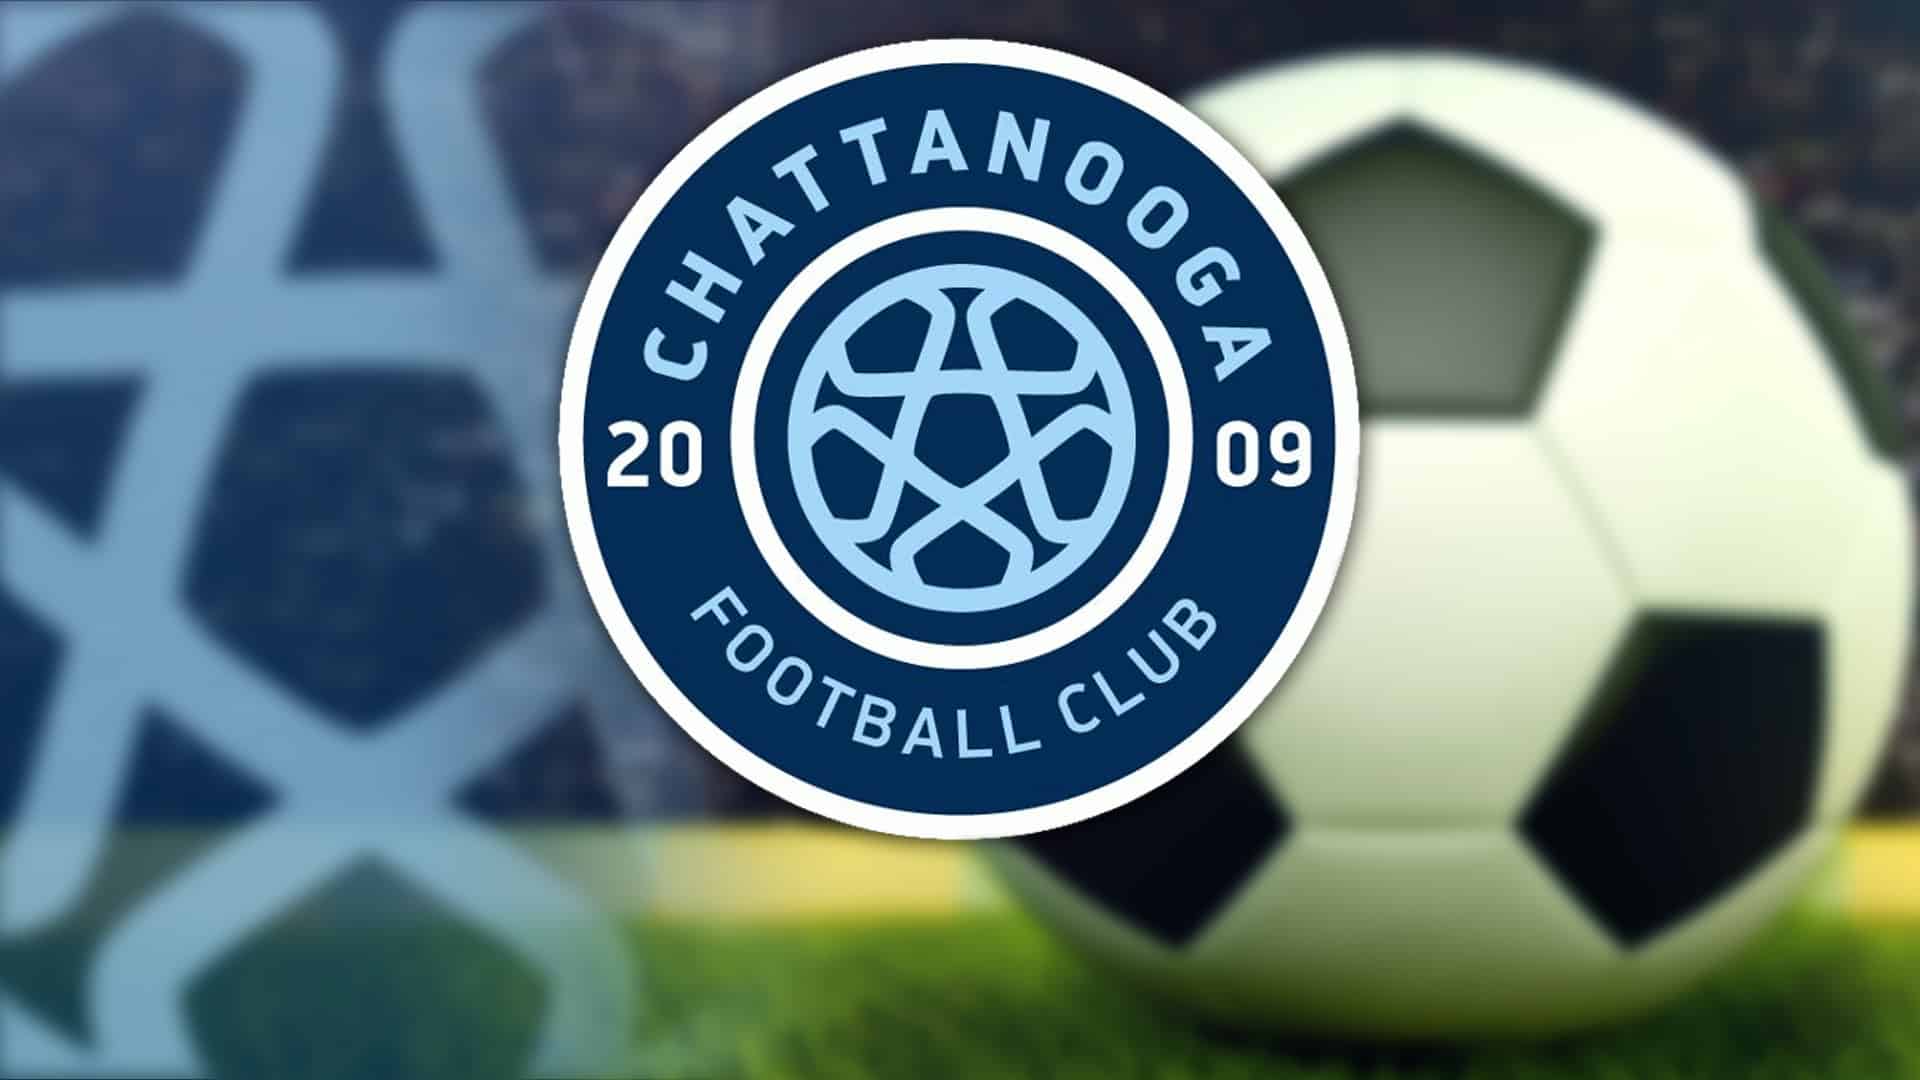 Chattanooga FC driven to bring NISA championship to the city